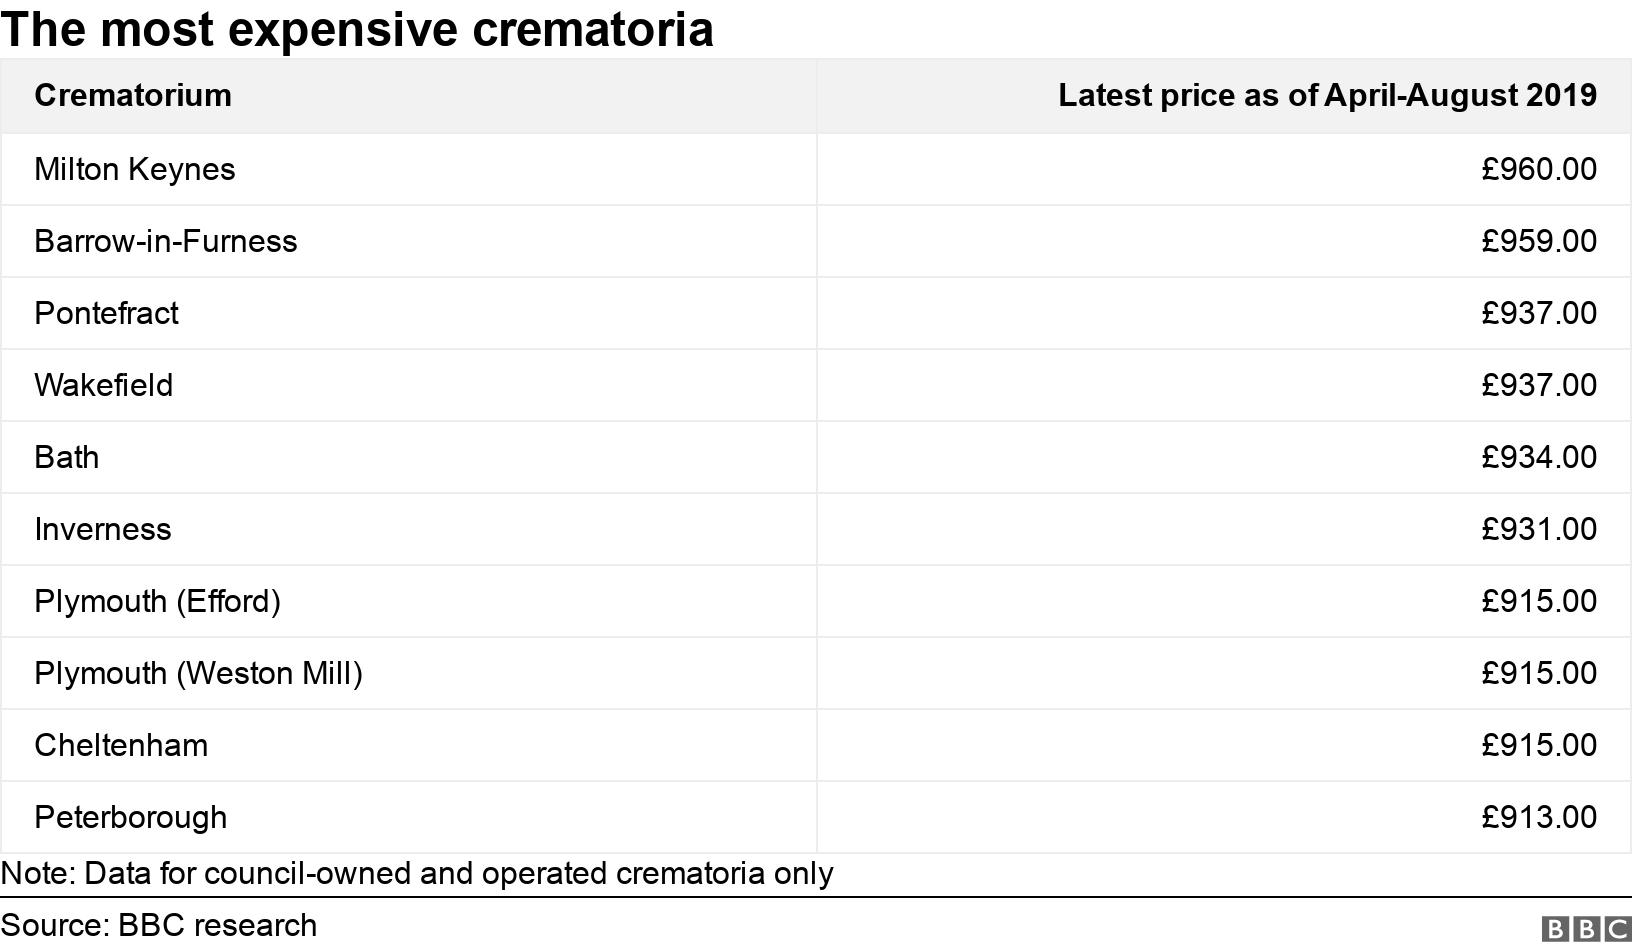 The most expensive crematoria. .  Note: Data for council-owned and operated crematoria only.